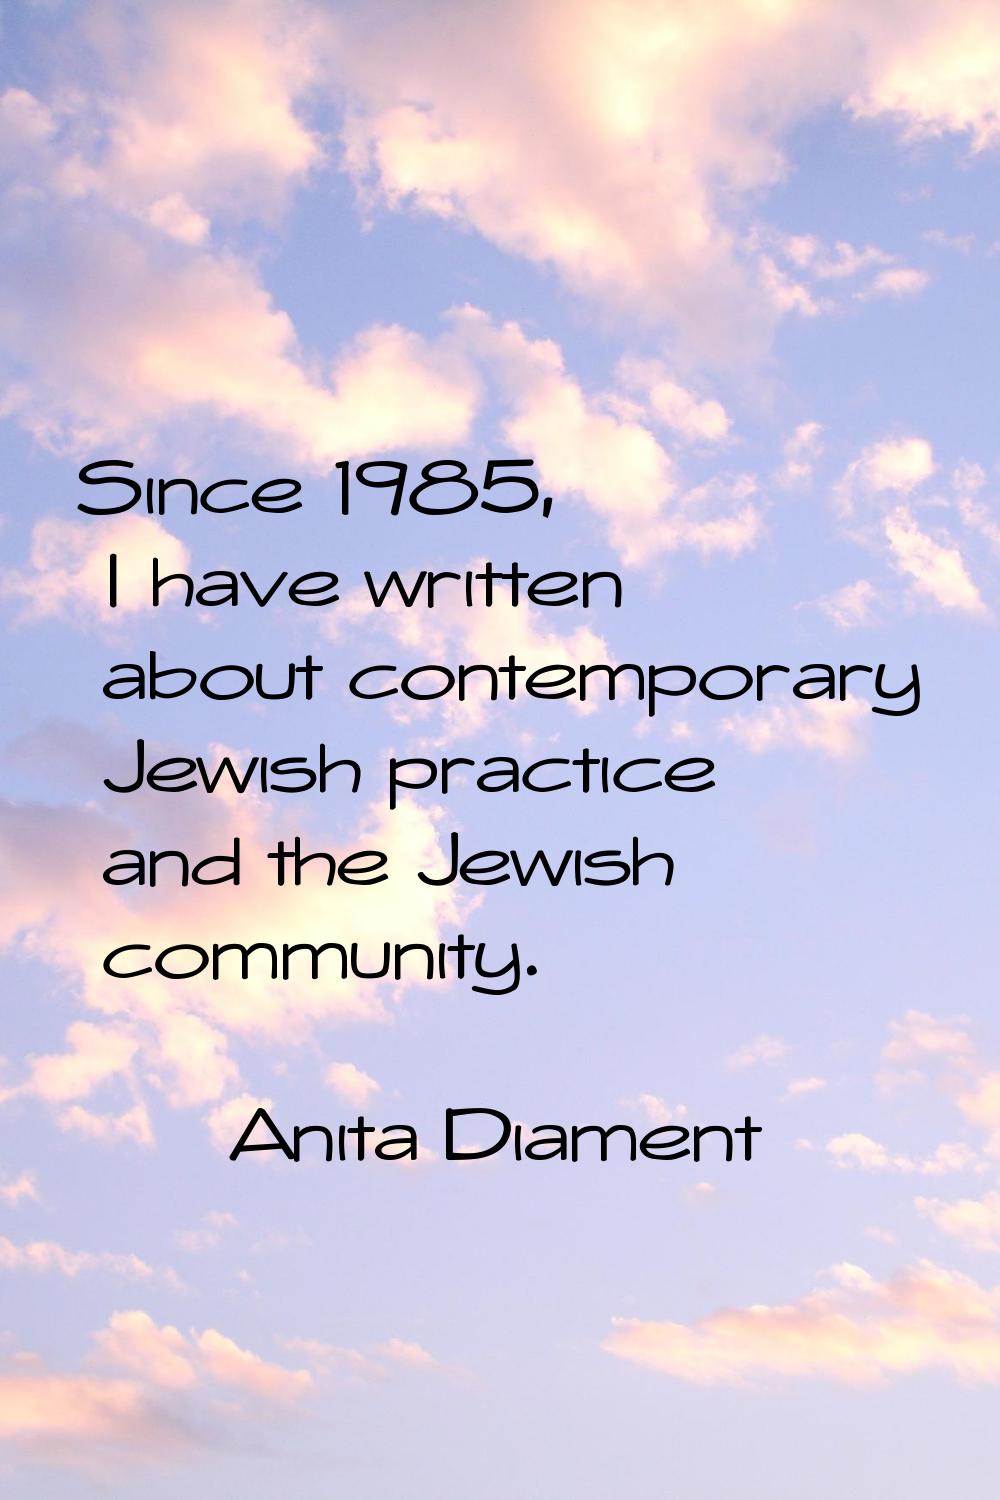 Since 1985, I have written about contemporary Jewish practice and the Jewish community.